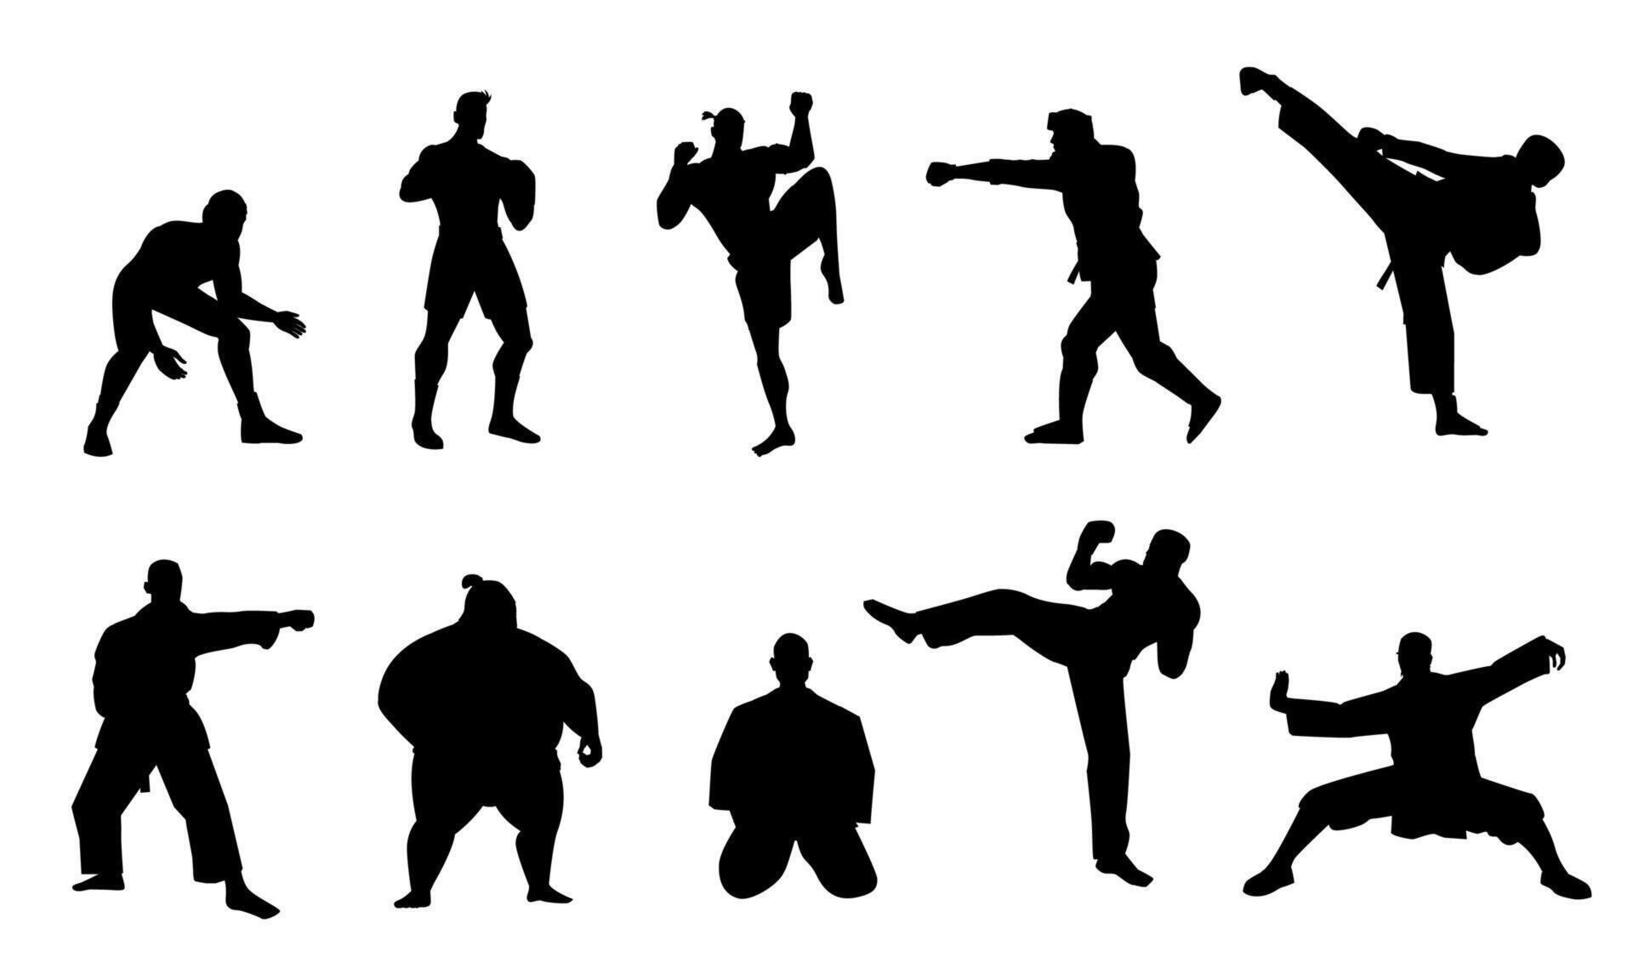 Martial fighters silhouettes. Black athletes characters punch opponents and sparring, traditional fight arts concept. Vector collection